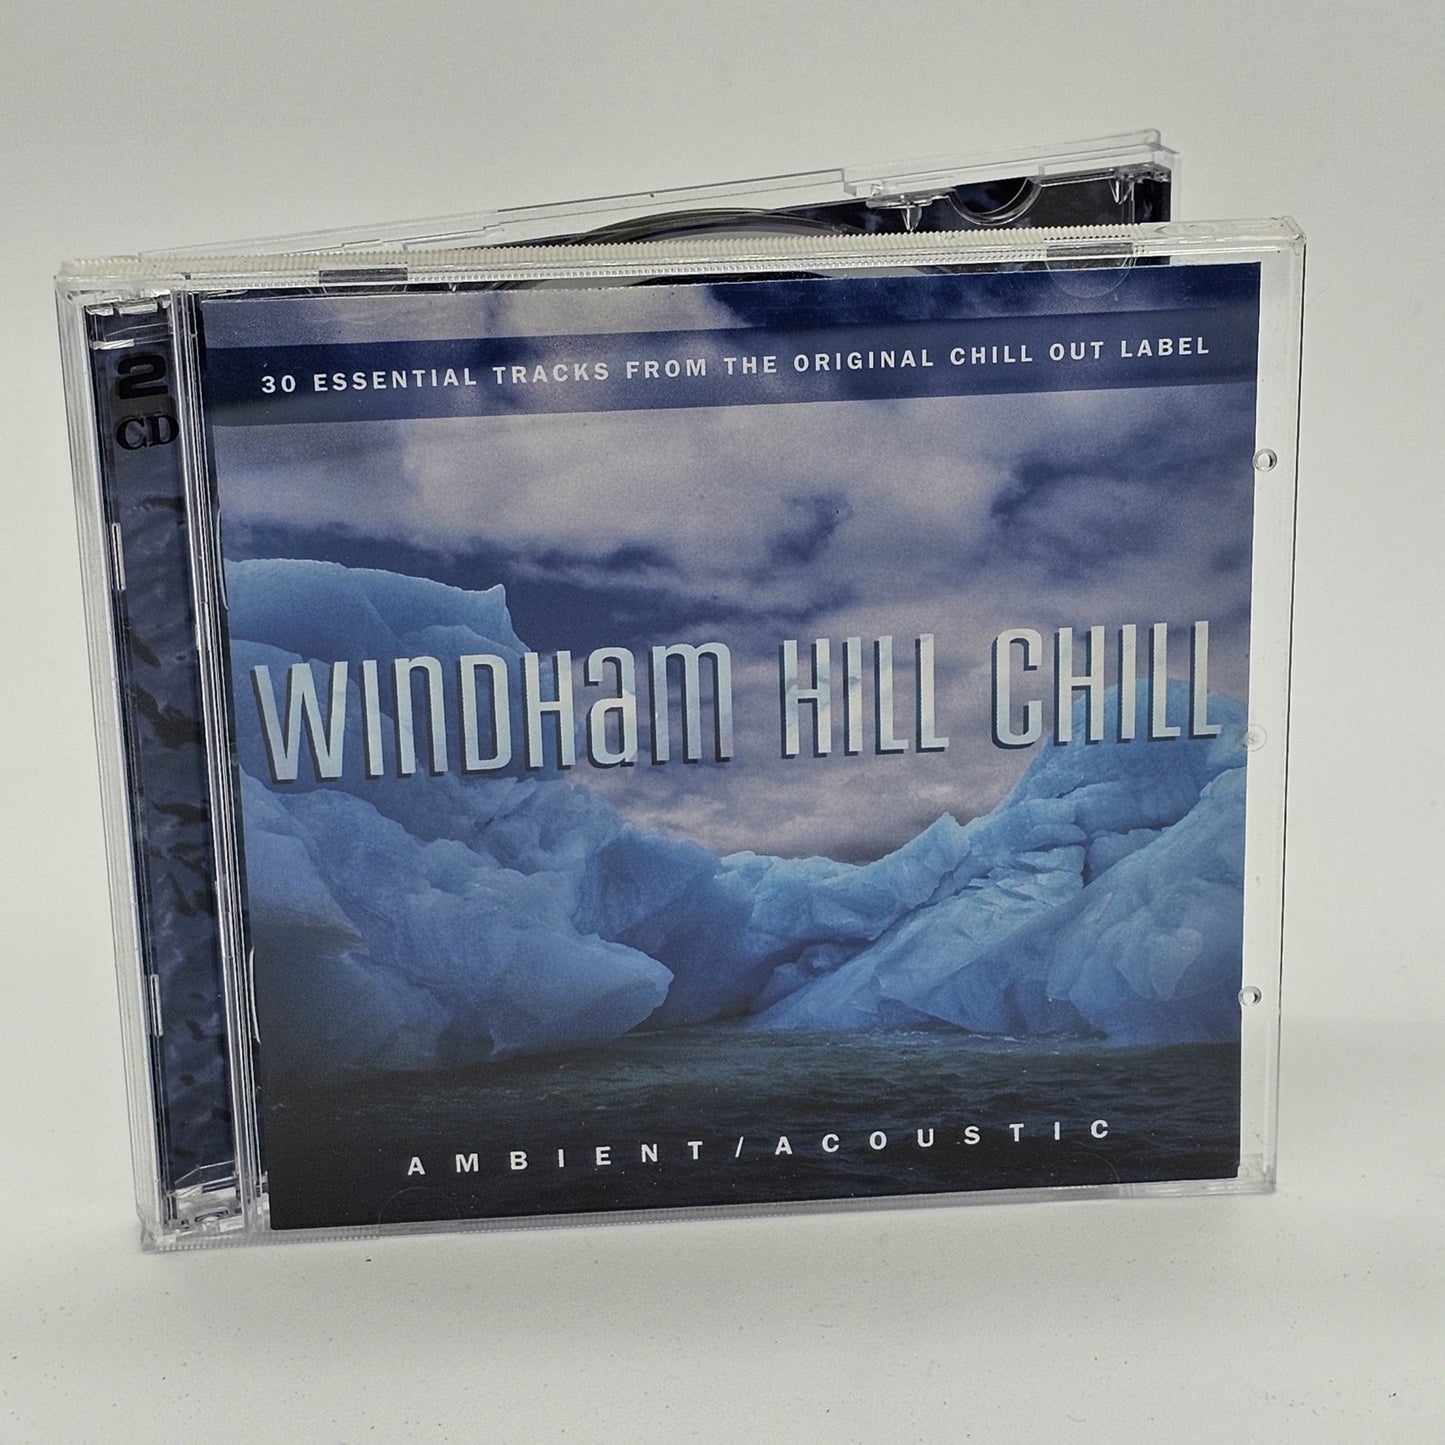 ASCAP - Windham Hill Chill | Ambient / Acoustic | 2 CD Set - Compact Disc - Steady Bunny Shop